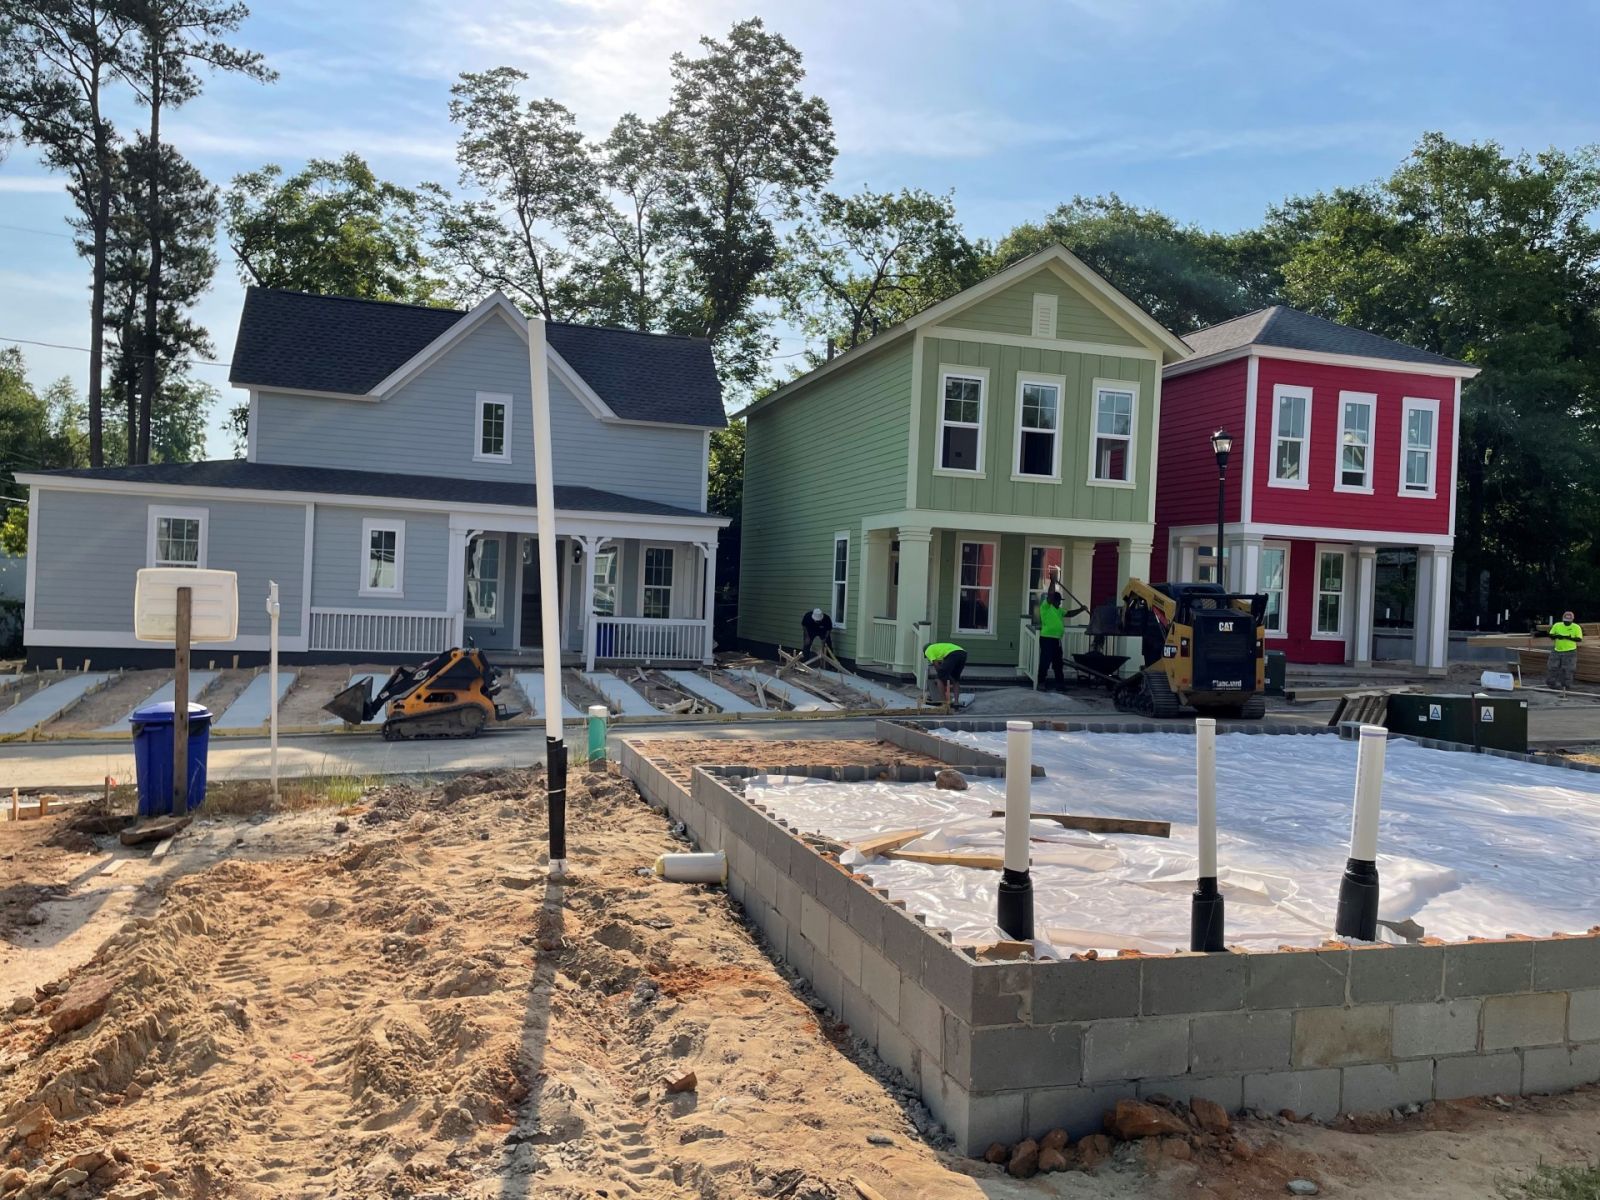 Five of 15 Phase II lots are under construction and expected to be ready for occupancy in July, according to the developers. All 11 Phase I homes in the 34-home development in West Columbia's River District are under contract or have been sold.  (Photo/Provided)